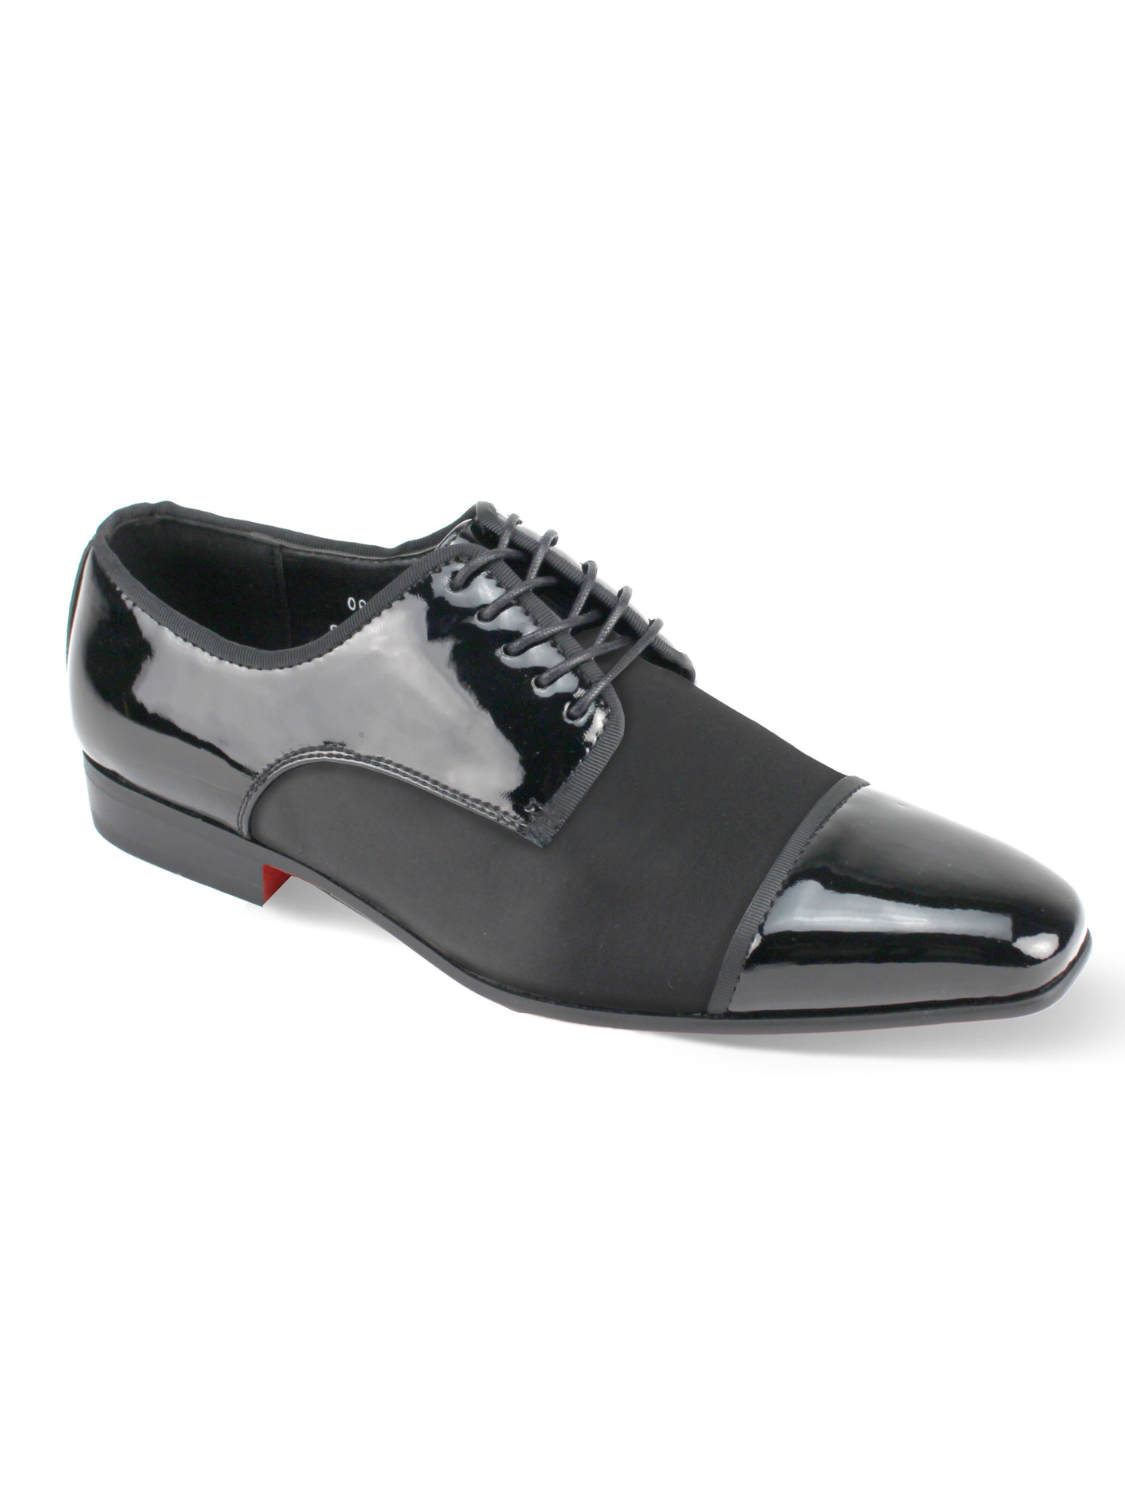 After Midnight Black patent leather and fabric formal loafer